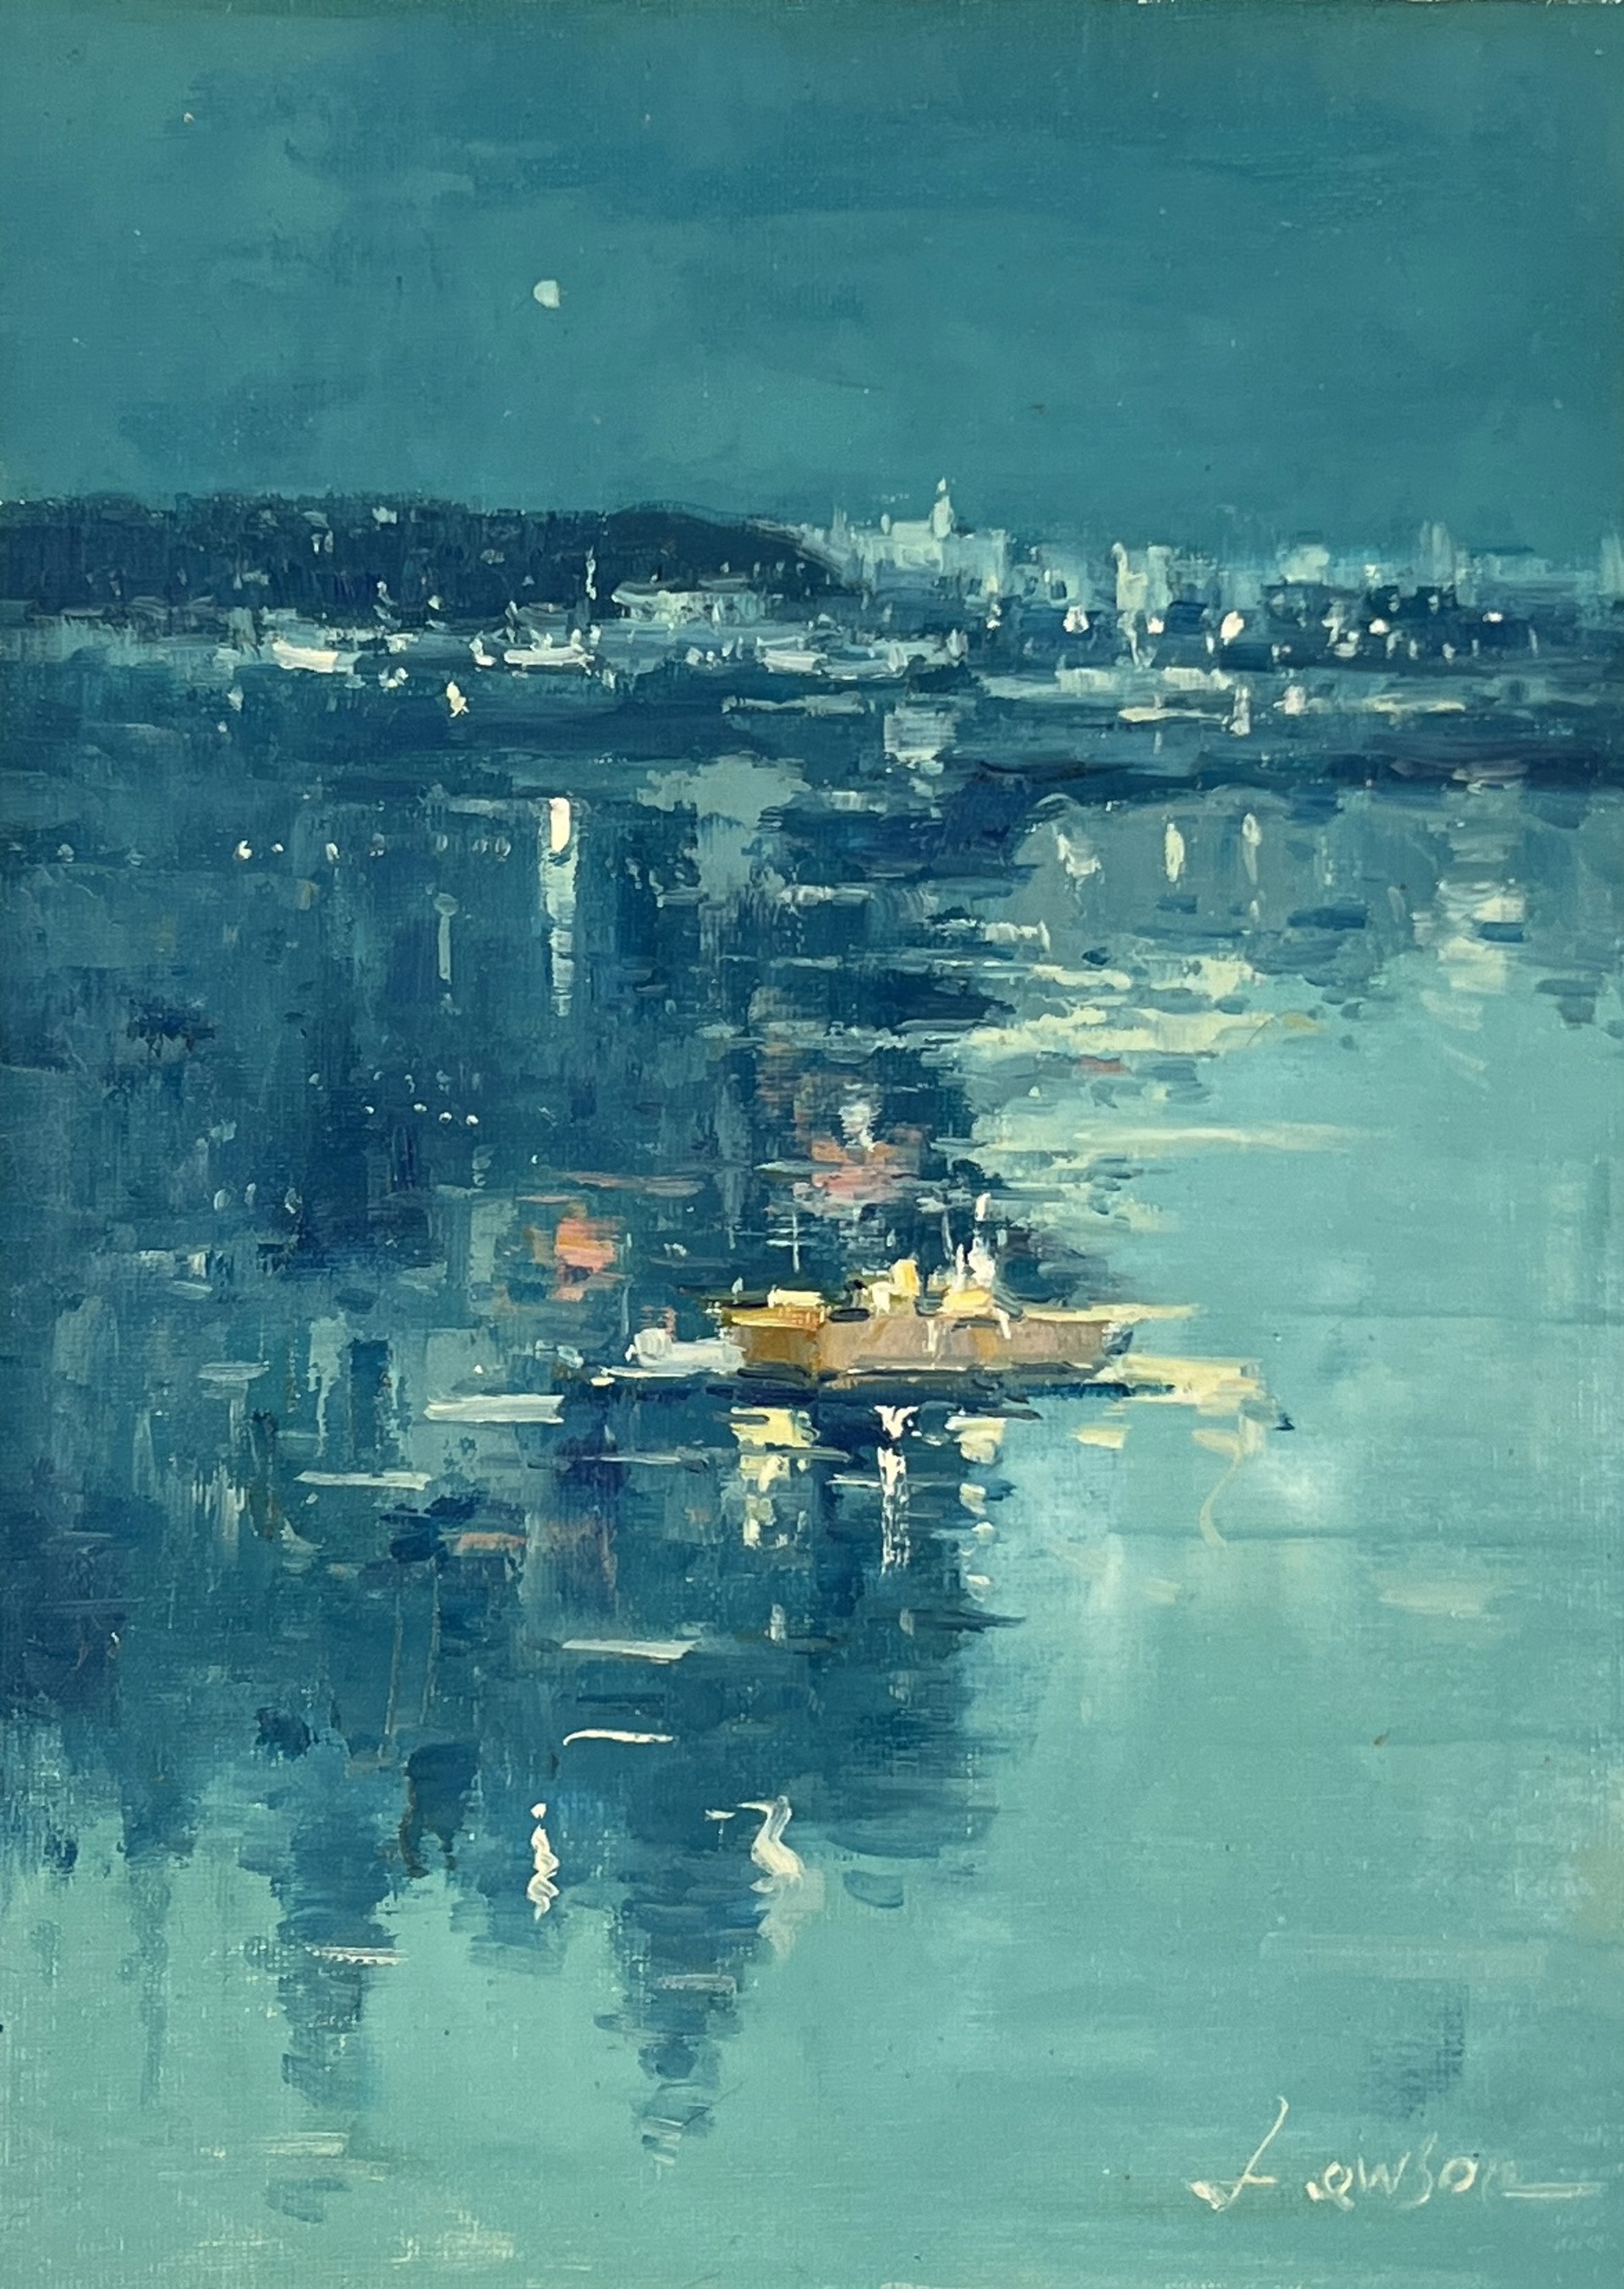 BOAT COMING INTO HARBOR AT NIGHT by LAWSON